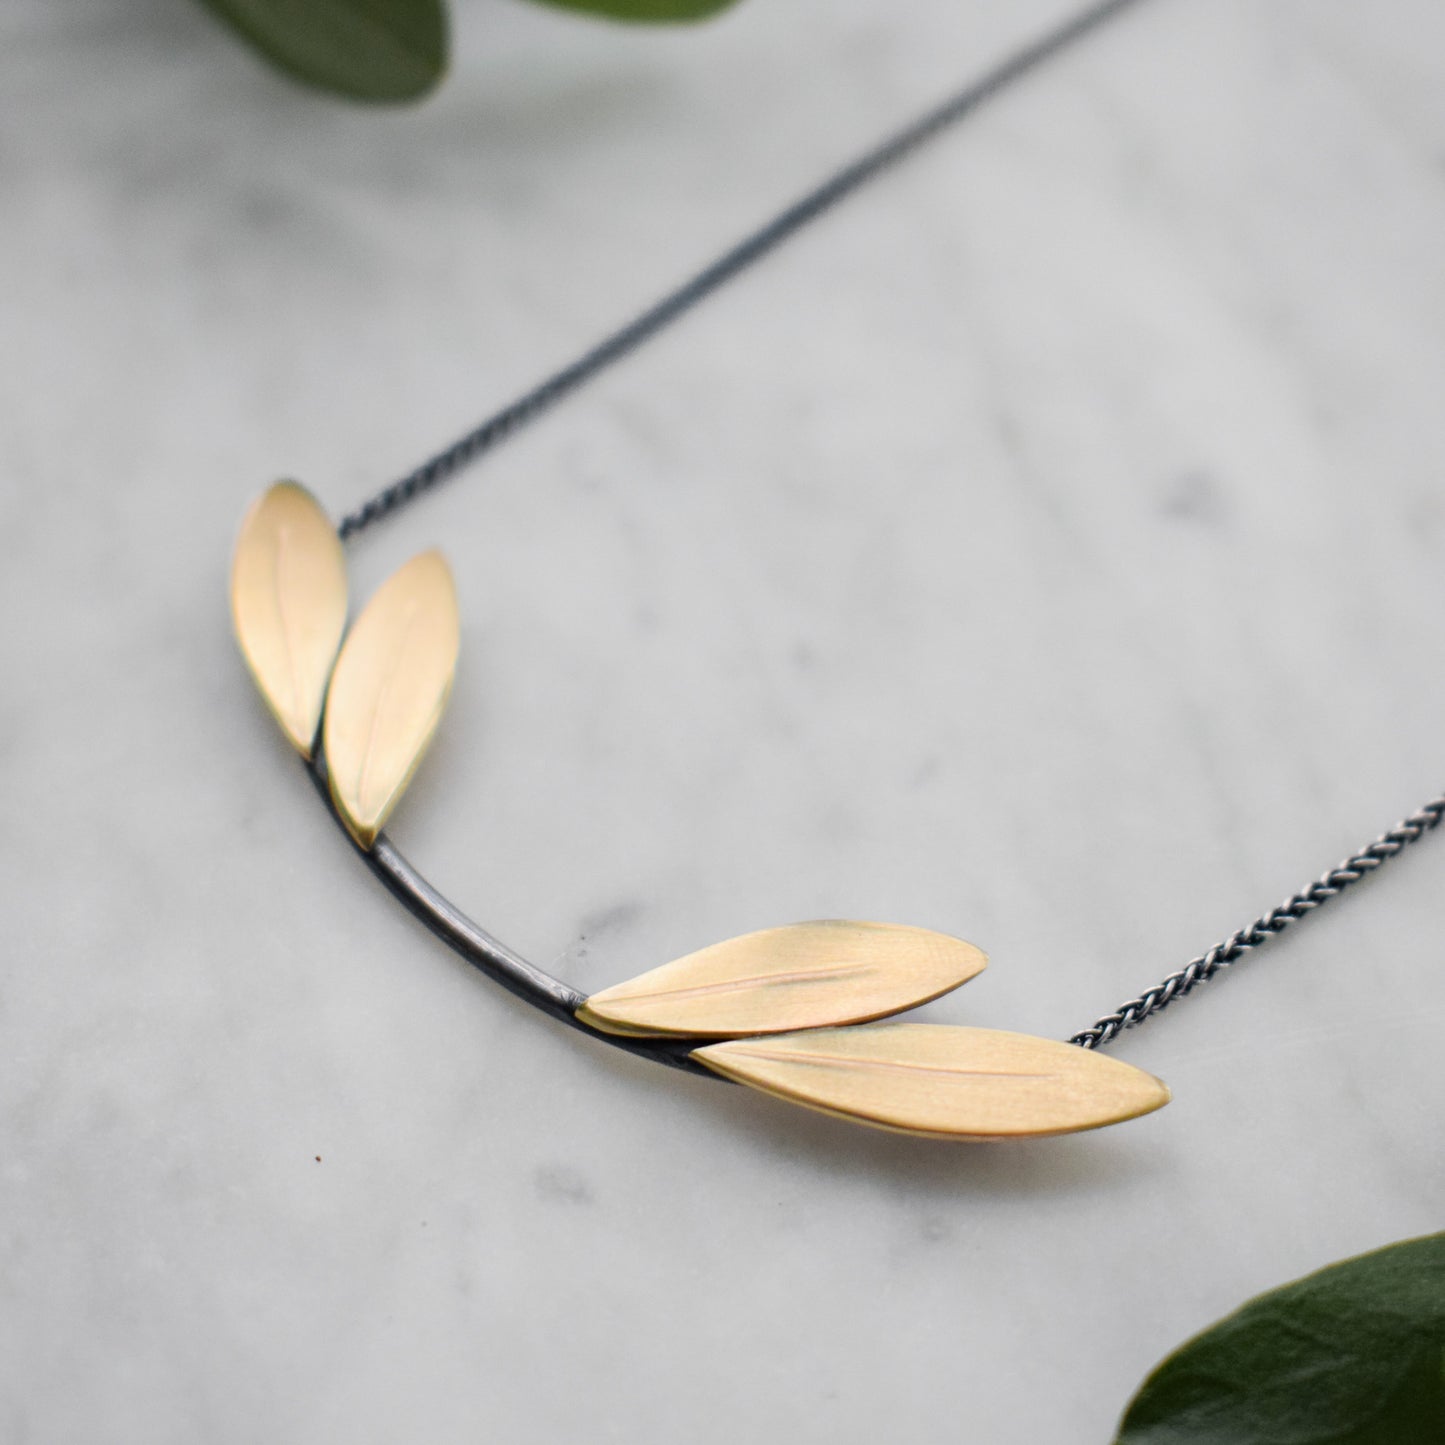 Mirrored Olive Branch Necklace